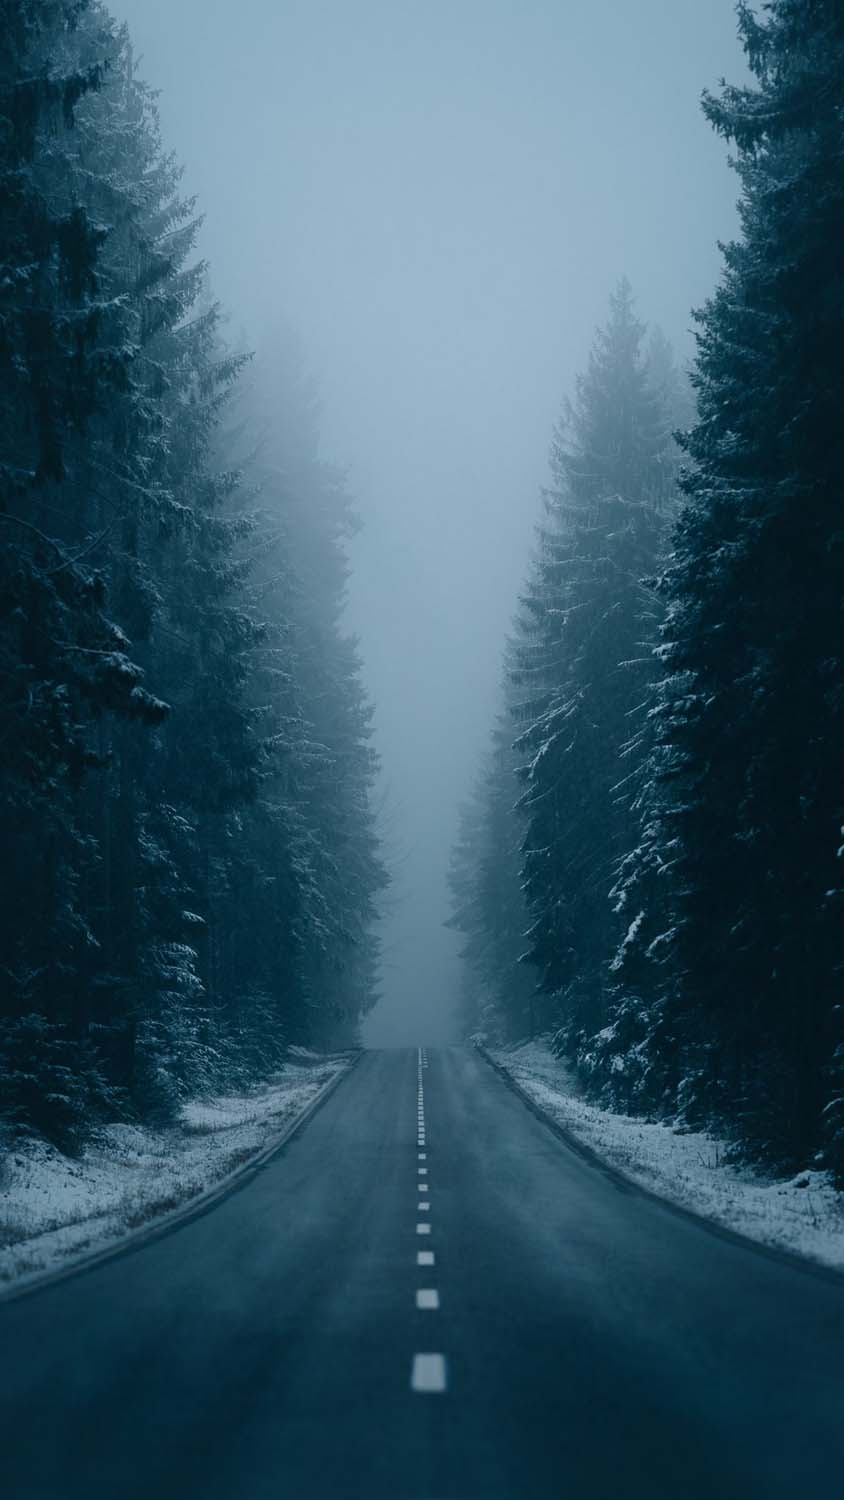 Snow Morning Mist Road IPhone Wallpaper HD  IPhone Wallpapers